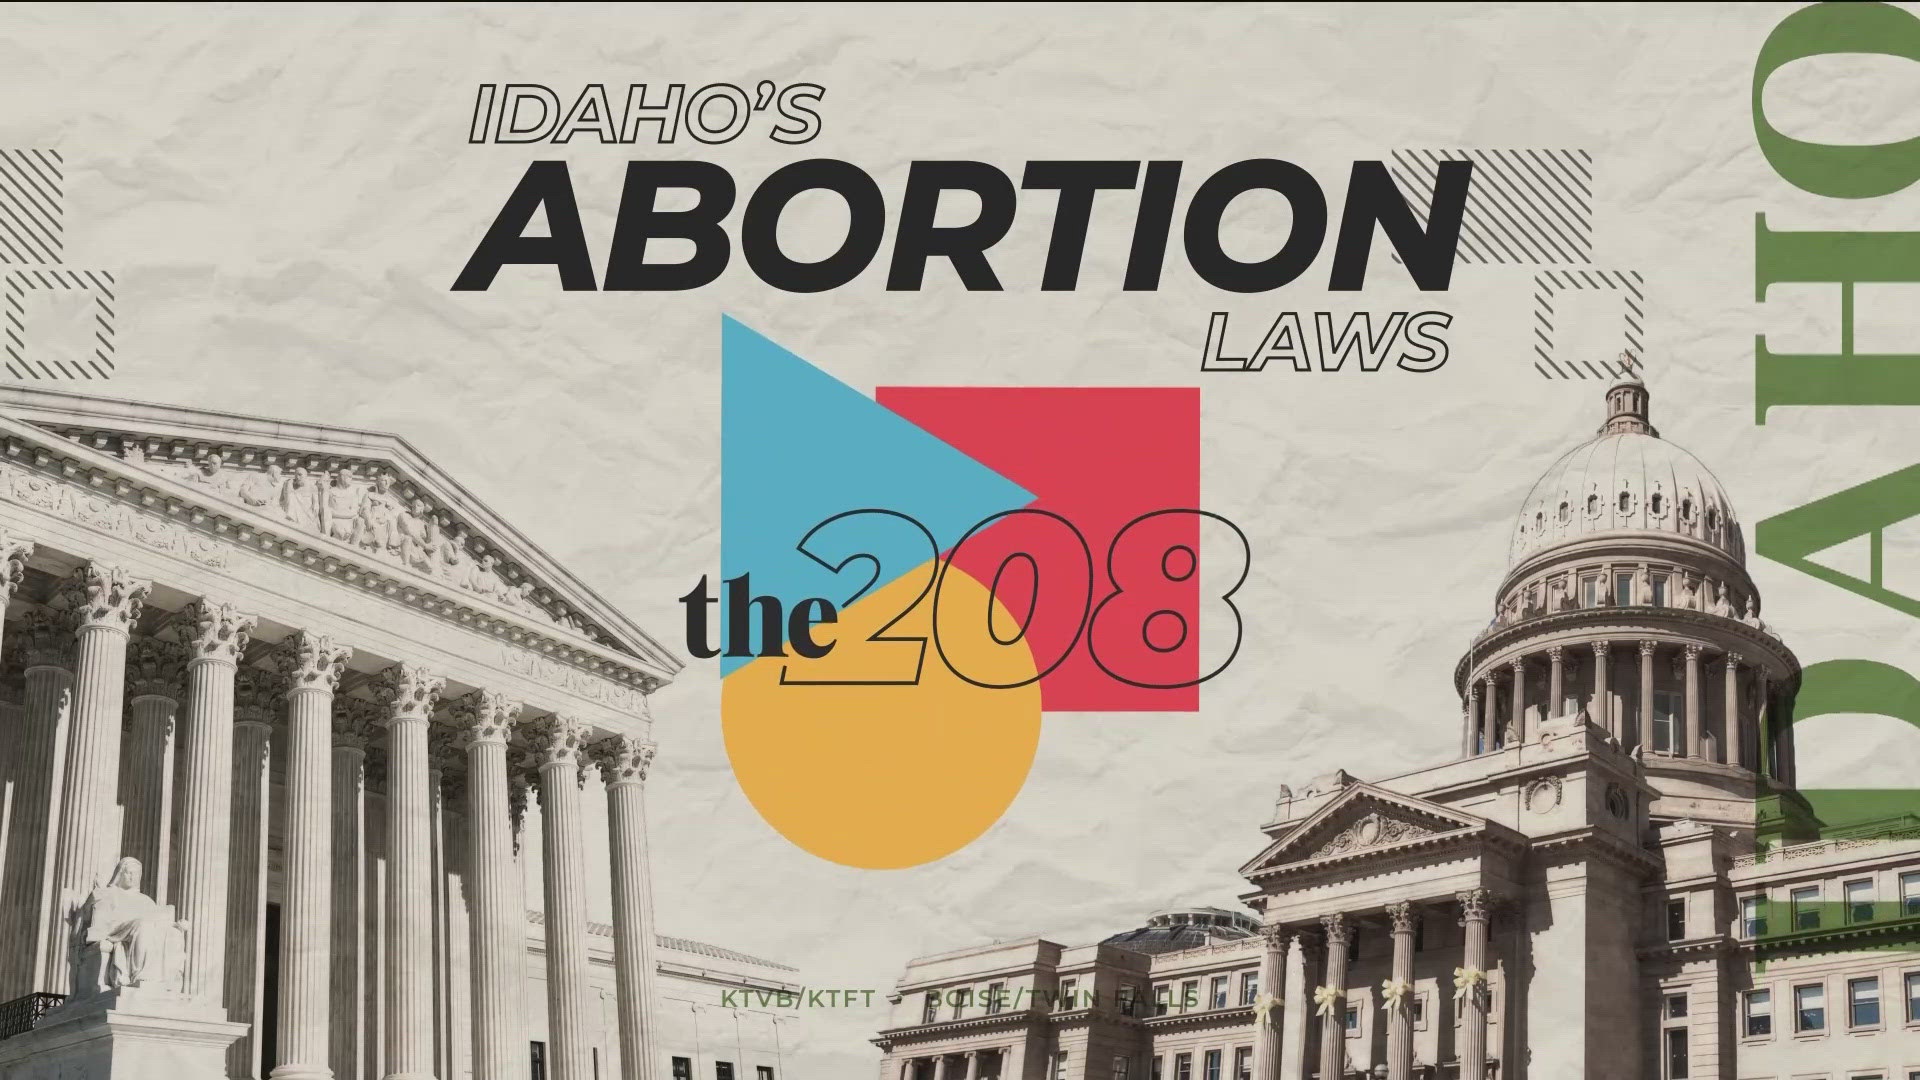 Abortion patients and lawsuits, doctors who have left state and viewer comments.